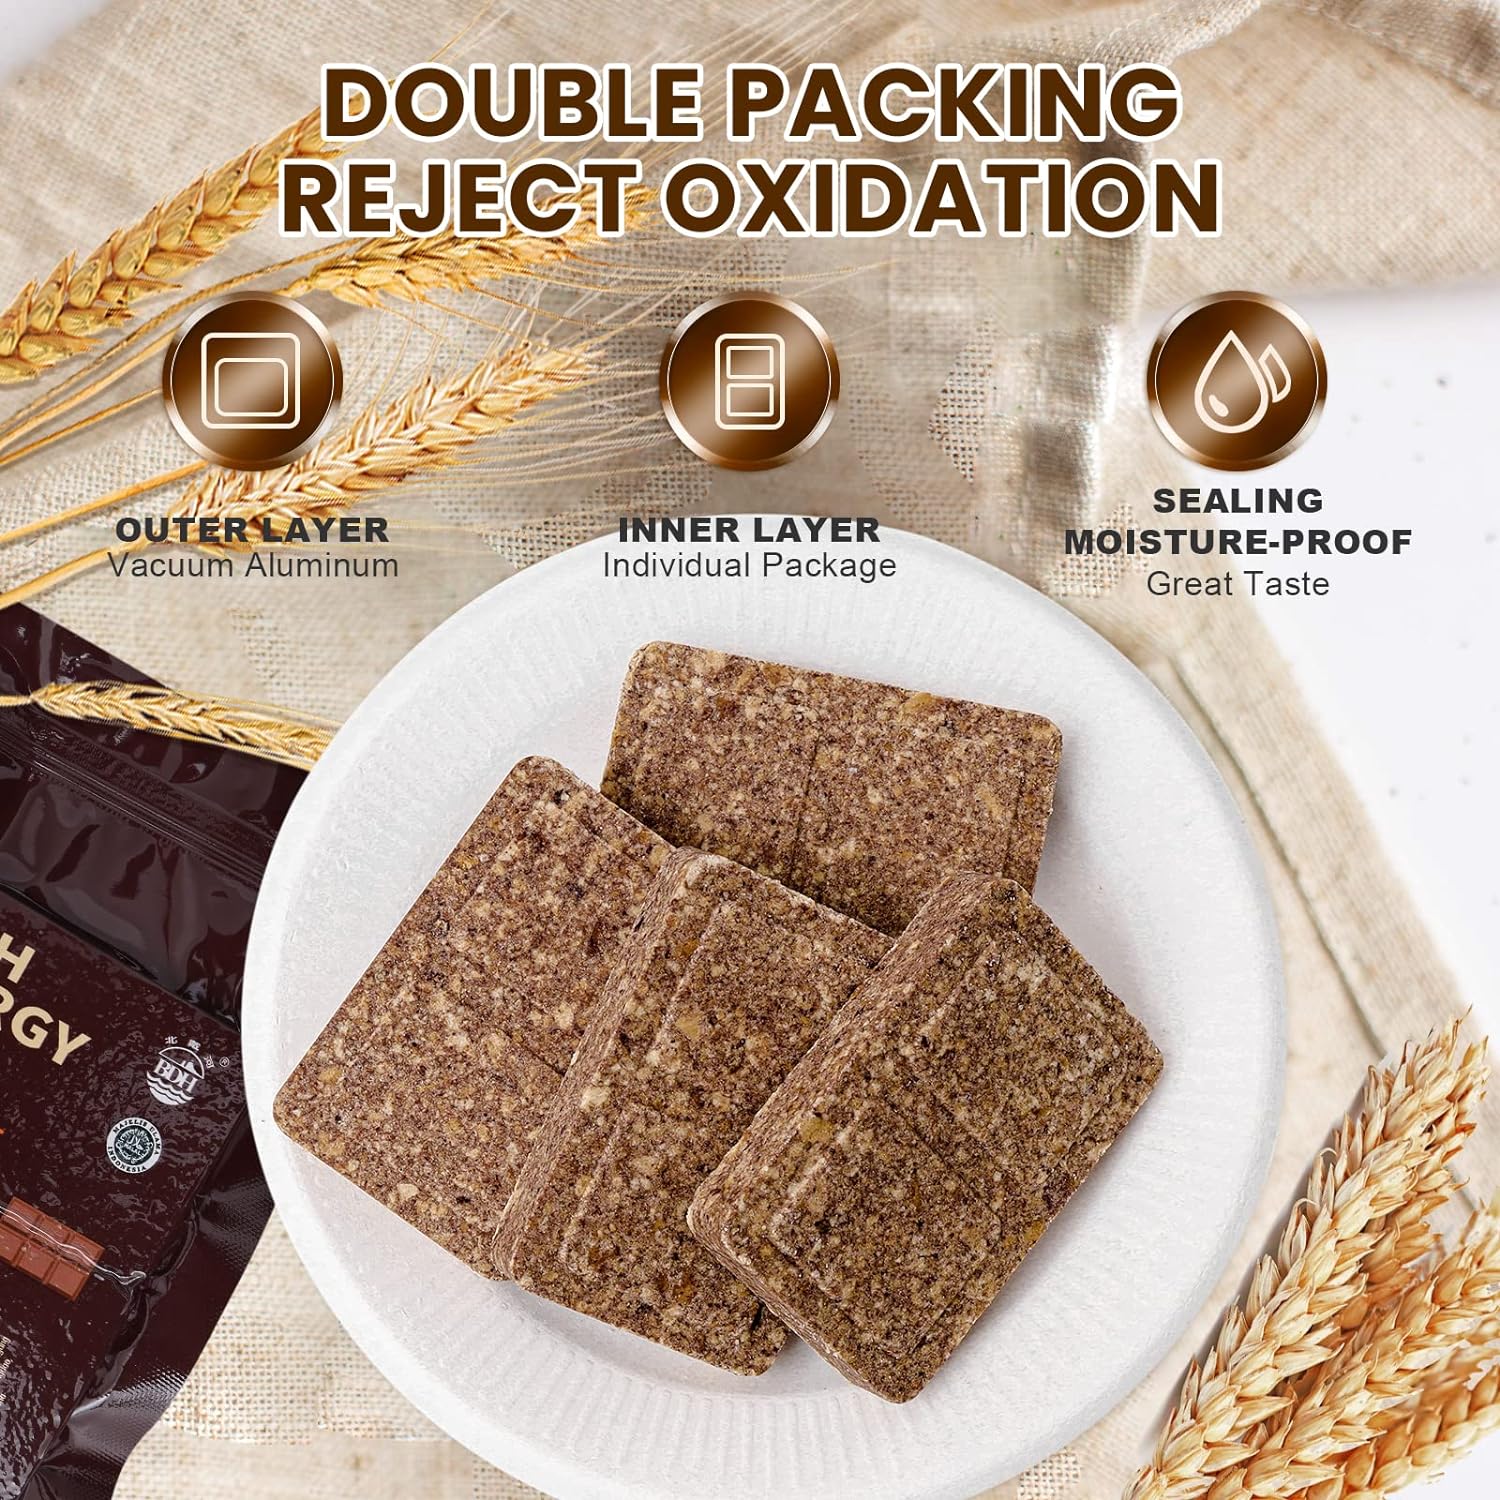 Emergency Food Survival Rations | 108 Bags | Chocolate Flavour - Next72Hours